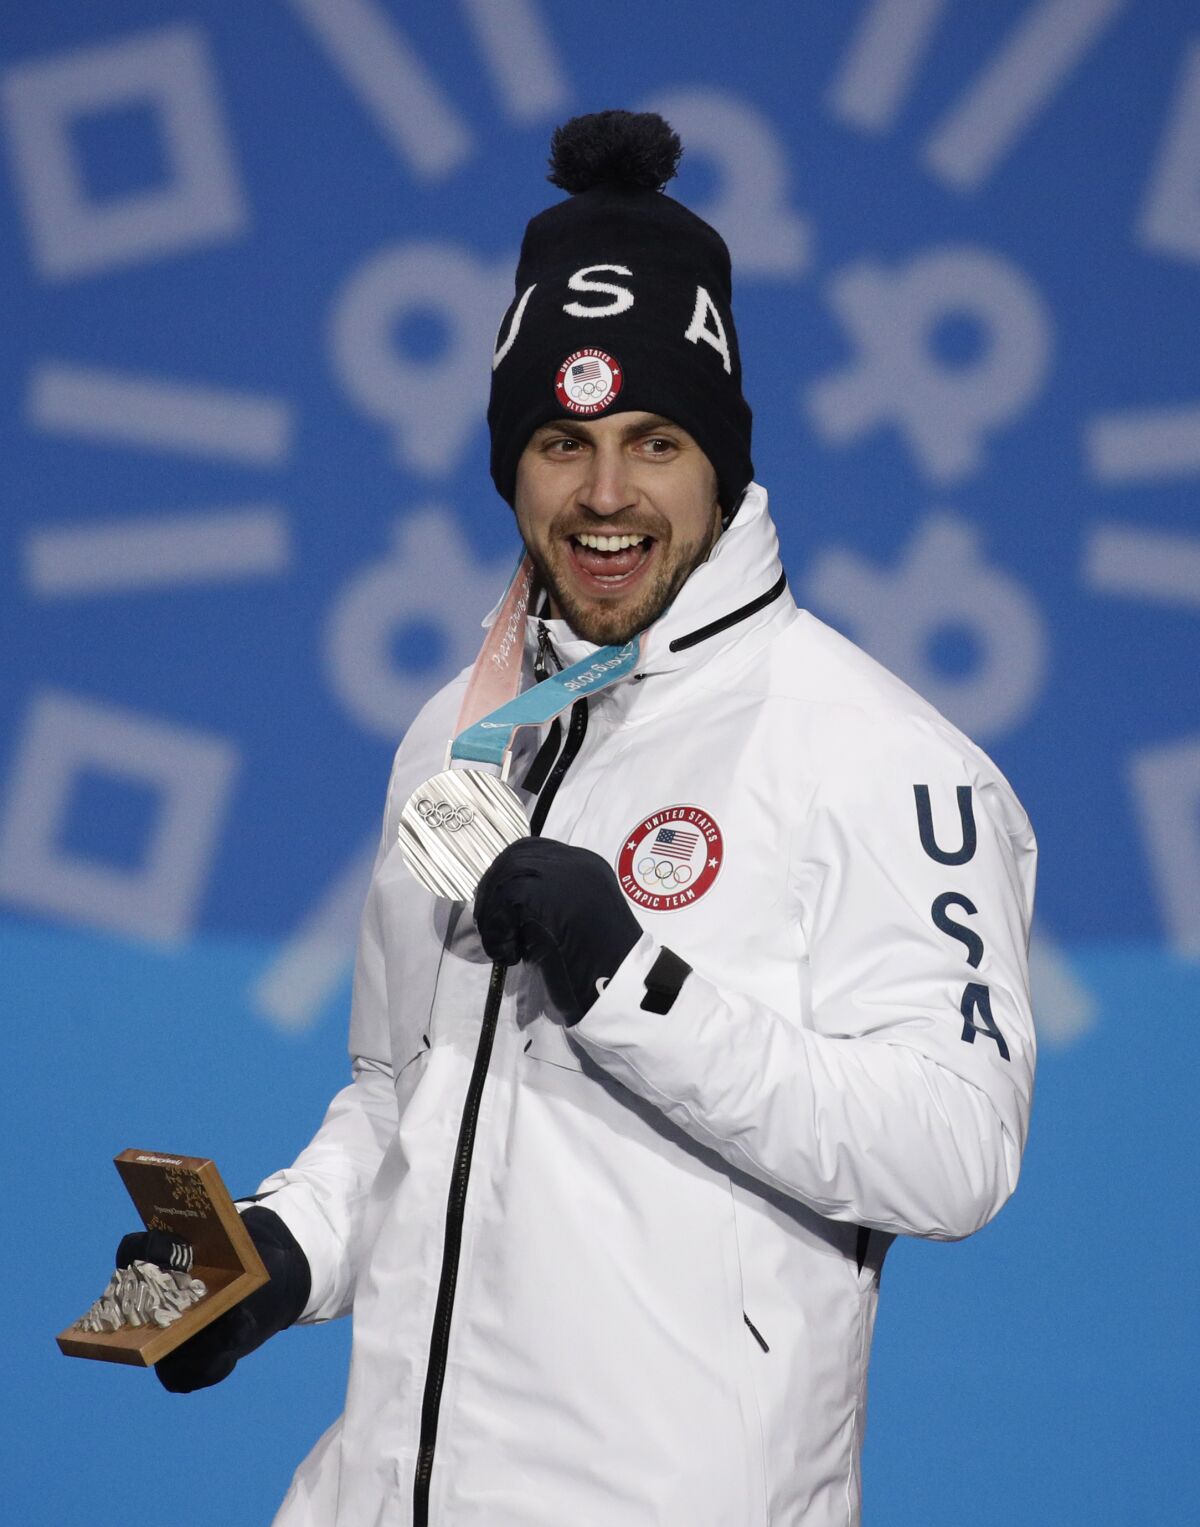 FILE - Men's luge competition silver medalist Chris Mazdzer, of the United States, smiles during the medals ceremony at the 2018 Winter Olympics in Pyeongchang, South Korea, Monday, Feb. 12, 2018. The men's luge, where Mazdzer is one of three Americans in the field, alongside Gustafson and Tucker West — starts Saturday, Feb. 5, 2022, with the first sliding medals of this year's Olympics to be awarded Sunday. (AP Photo/Jae C. Hong, File)